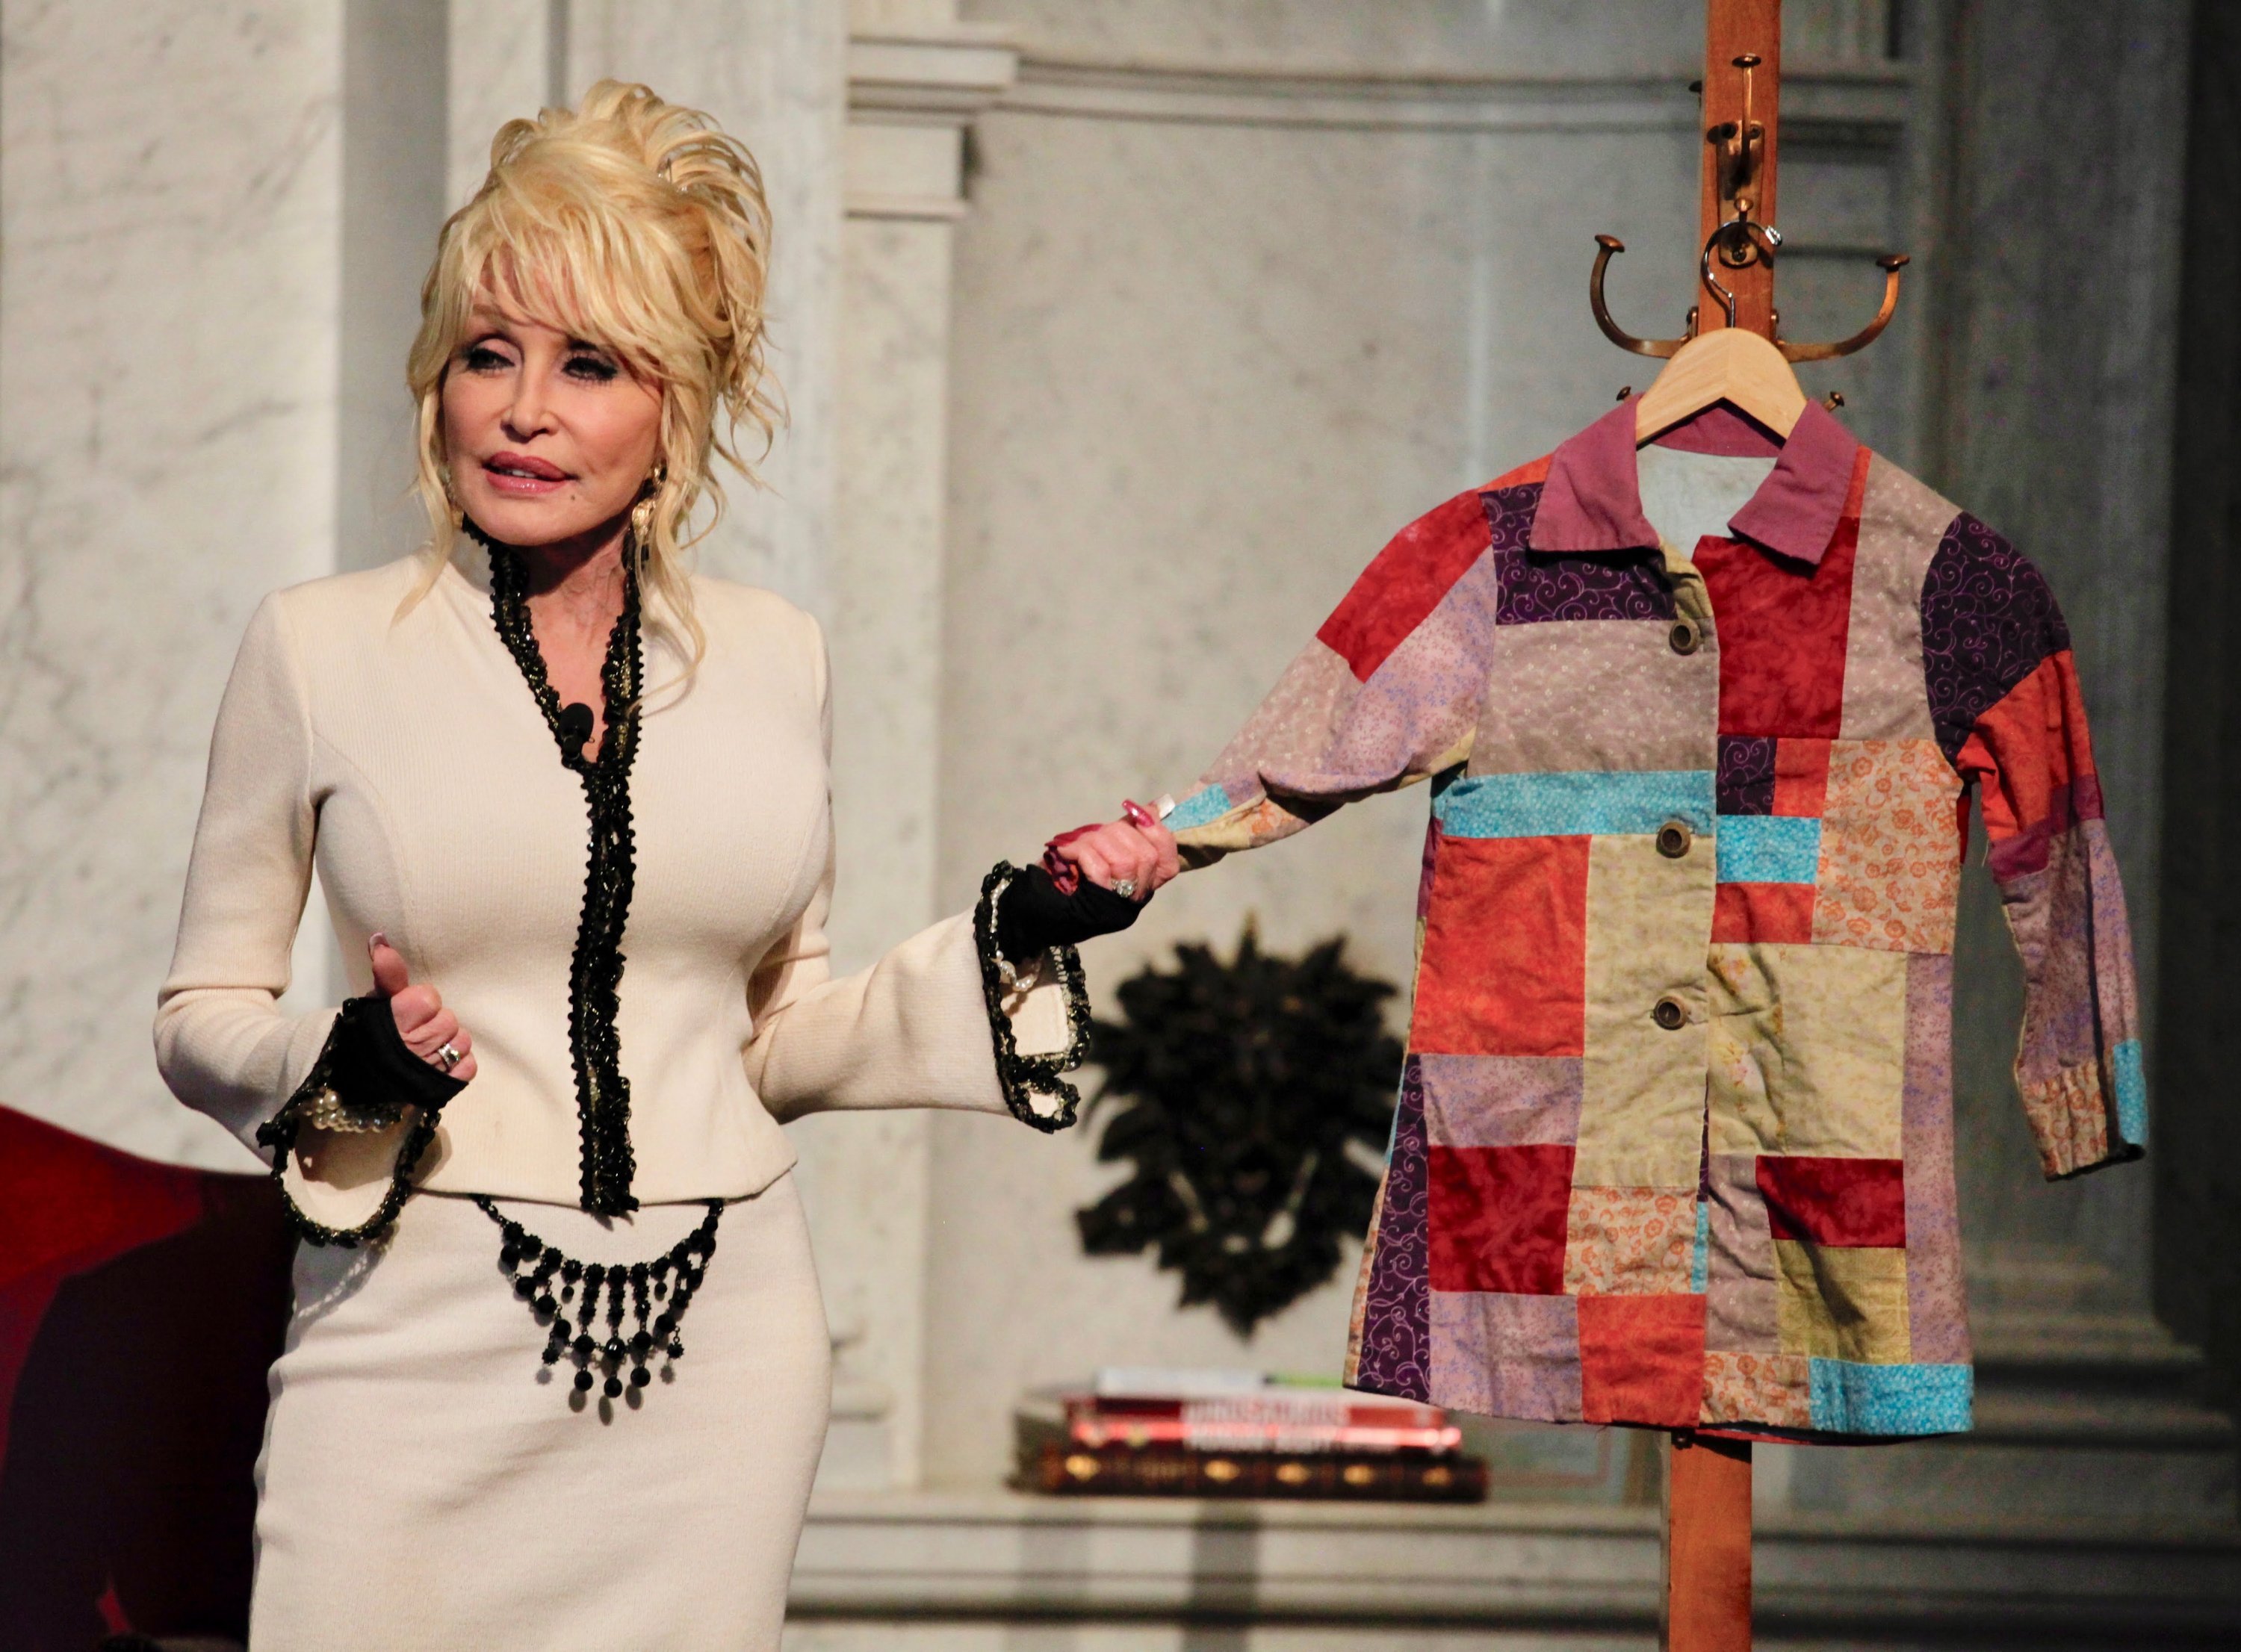 Parton with a replica of the coat that inspired her hit song and book. Both are based on a true story from Parton's childhood: her mother made her a coat out of rags given to the family and taught her to be proud of herself despite growing up in poverty. The book is widely used to discuss and address bullying. 